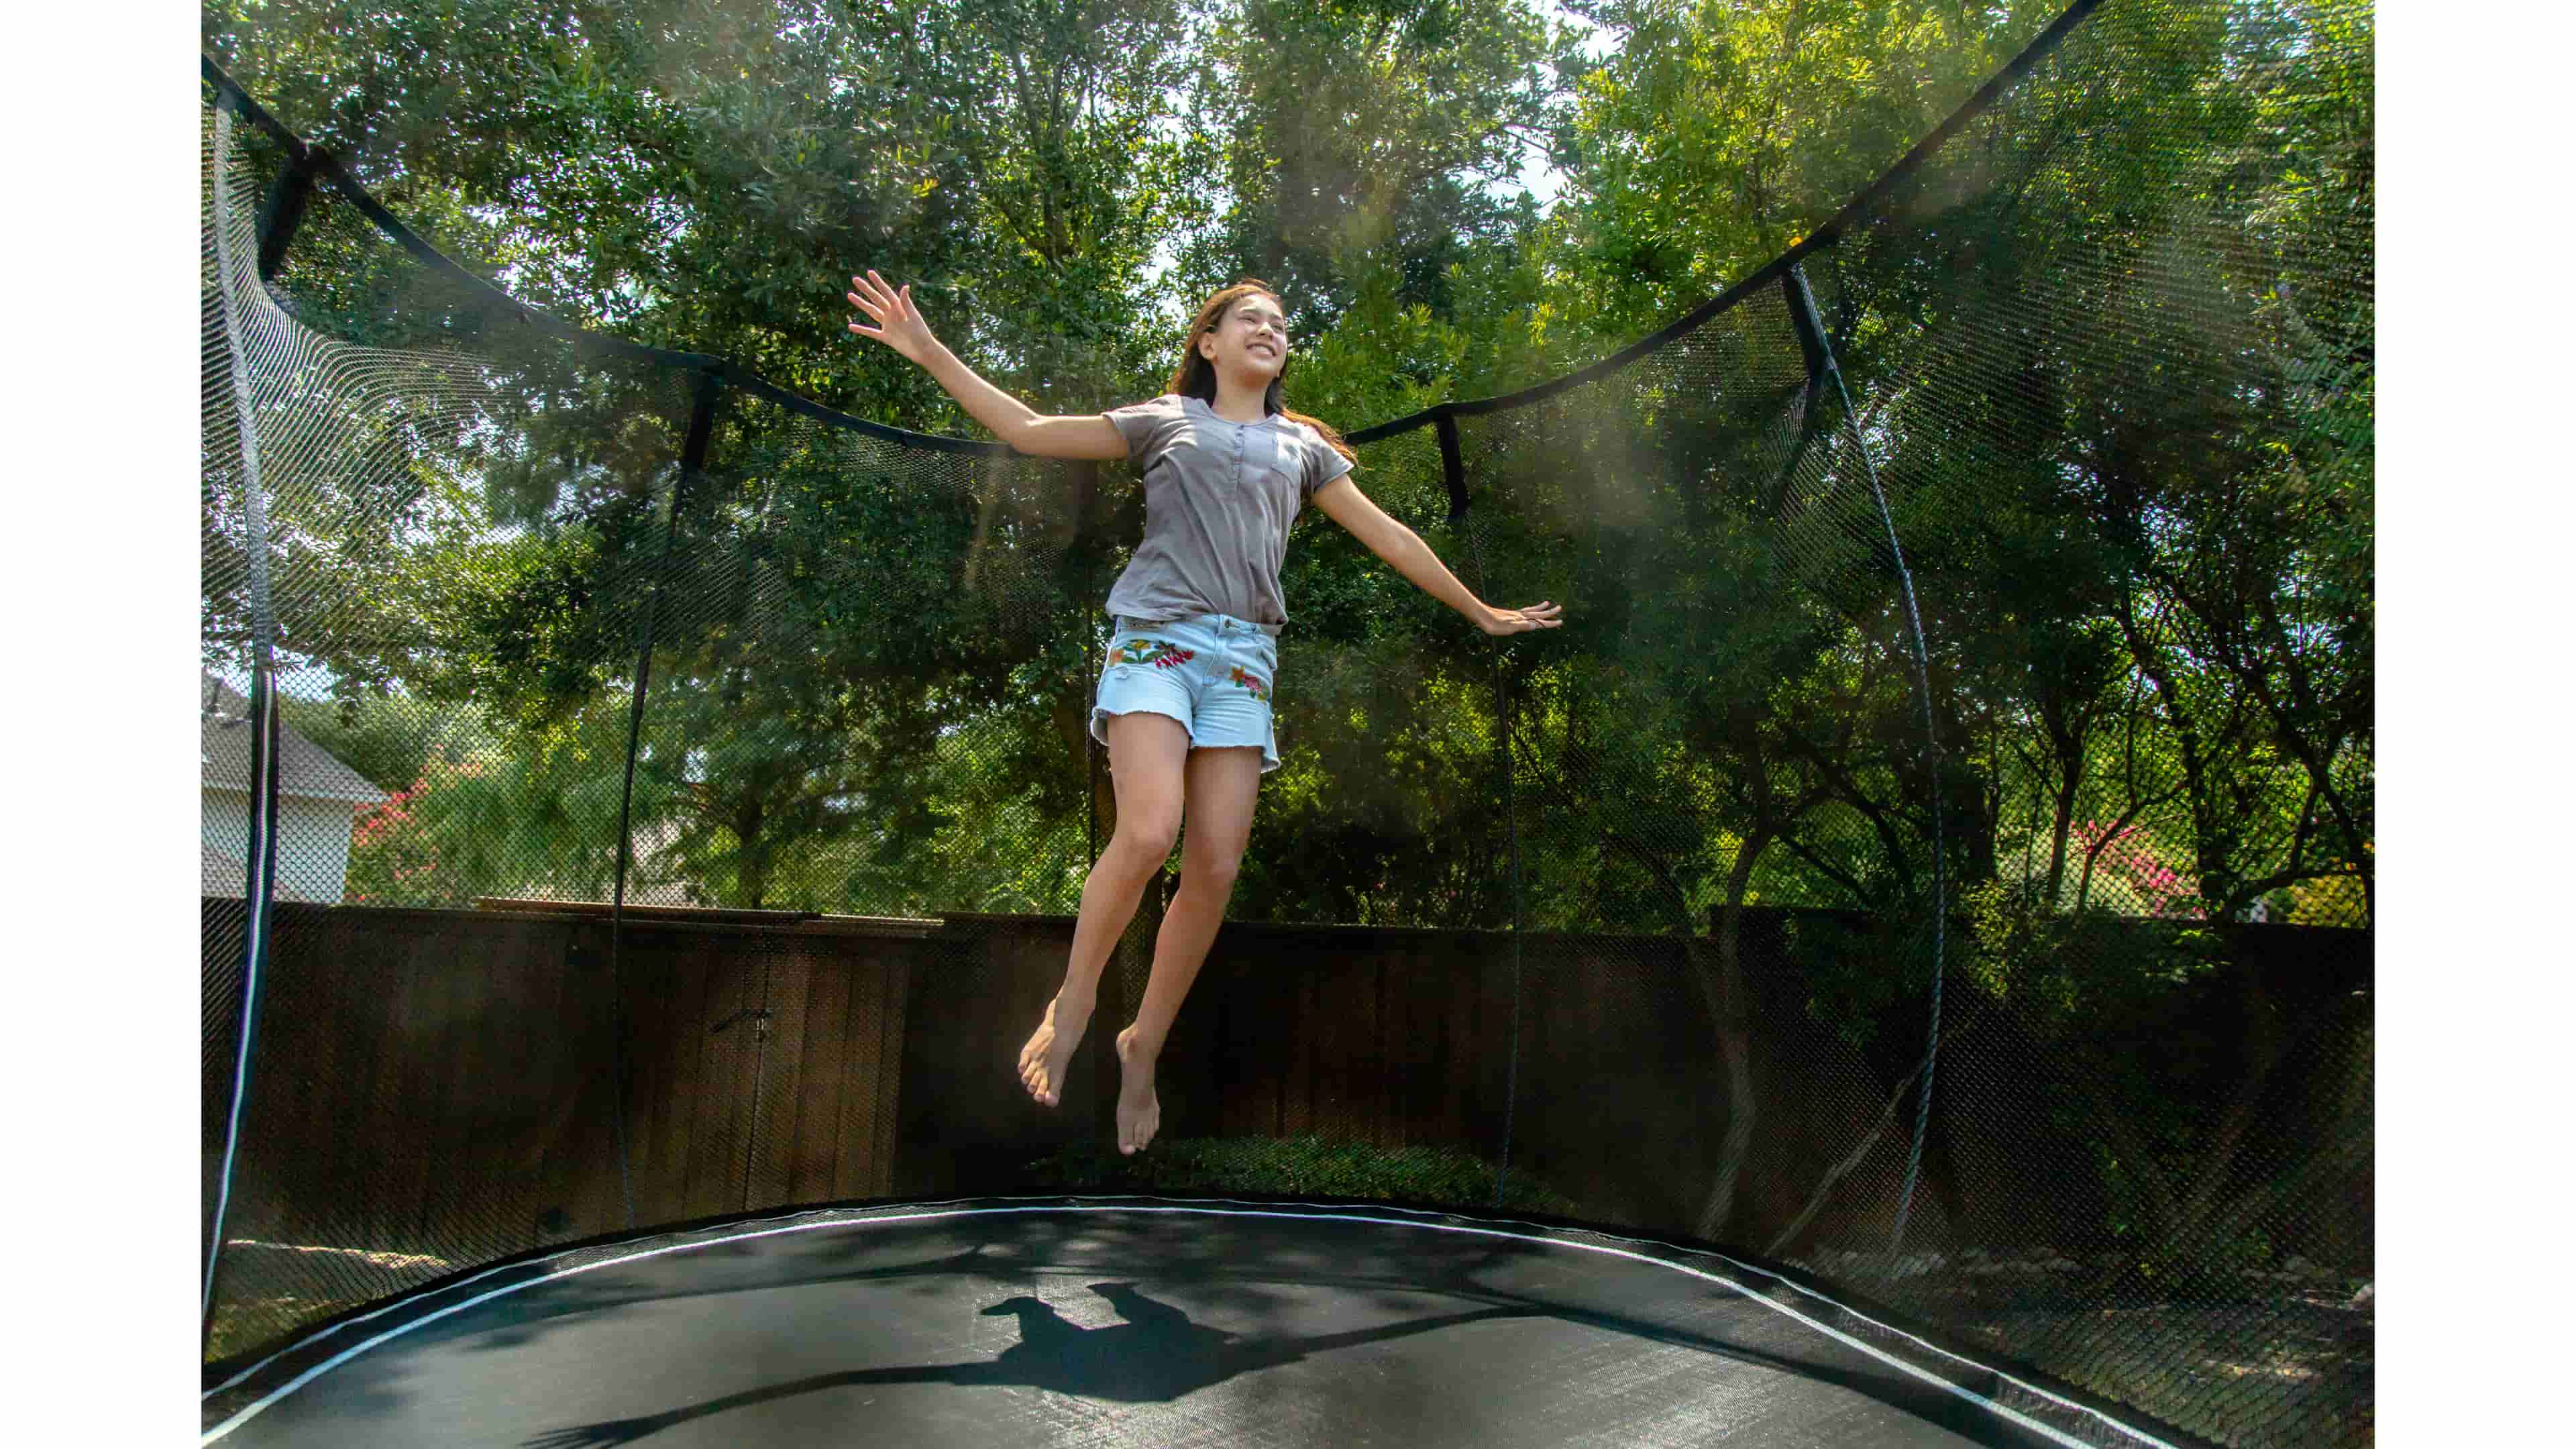 Should You Buy a Used Trampoline? | Pros & Cons